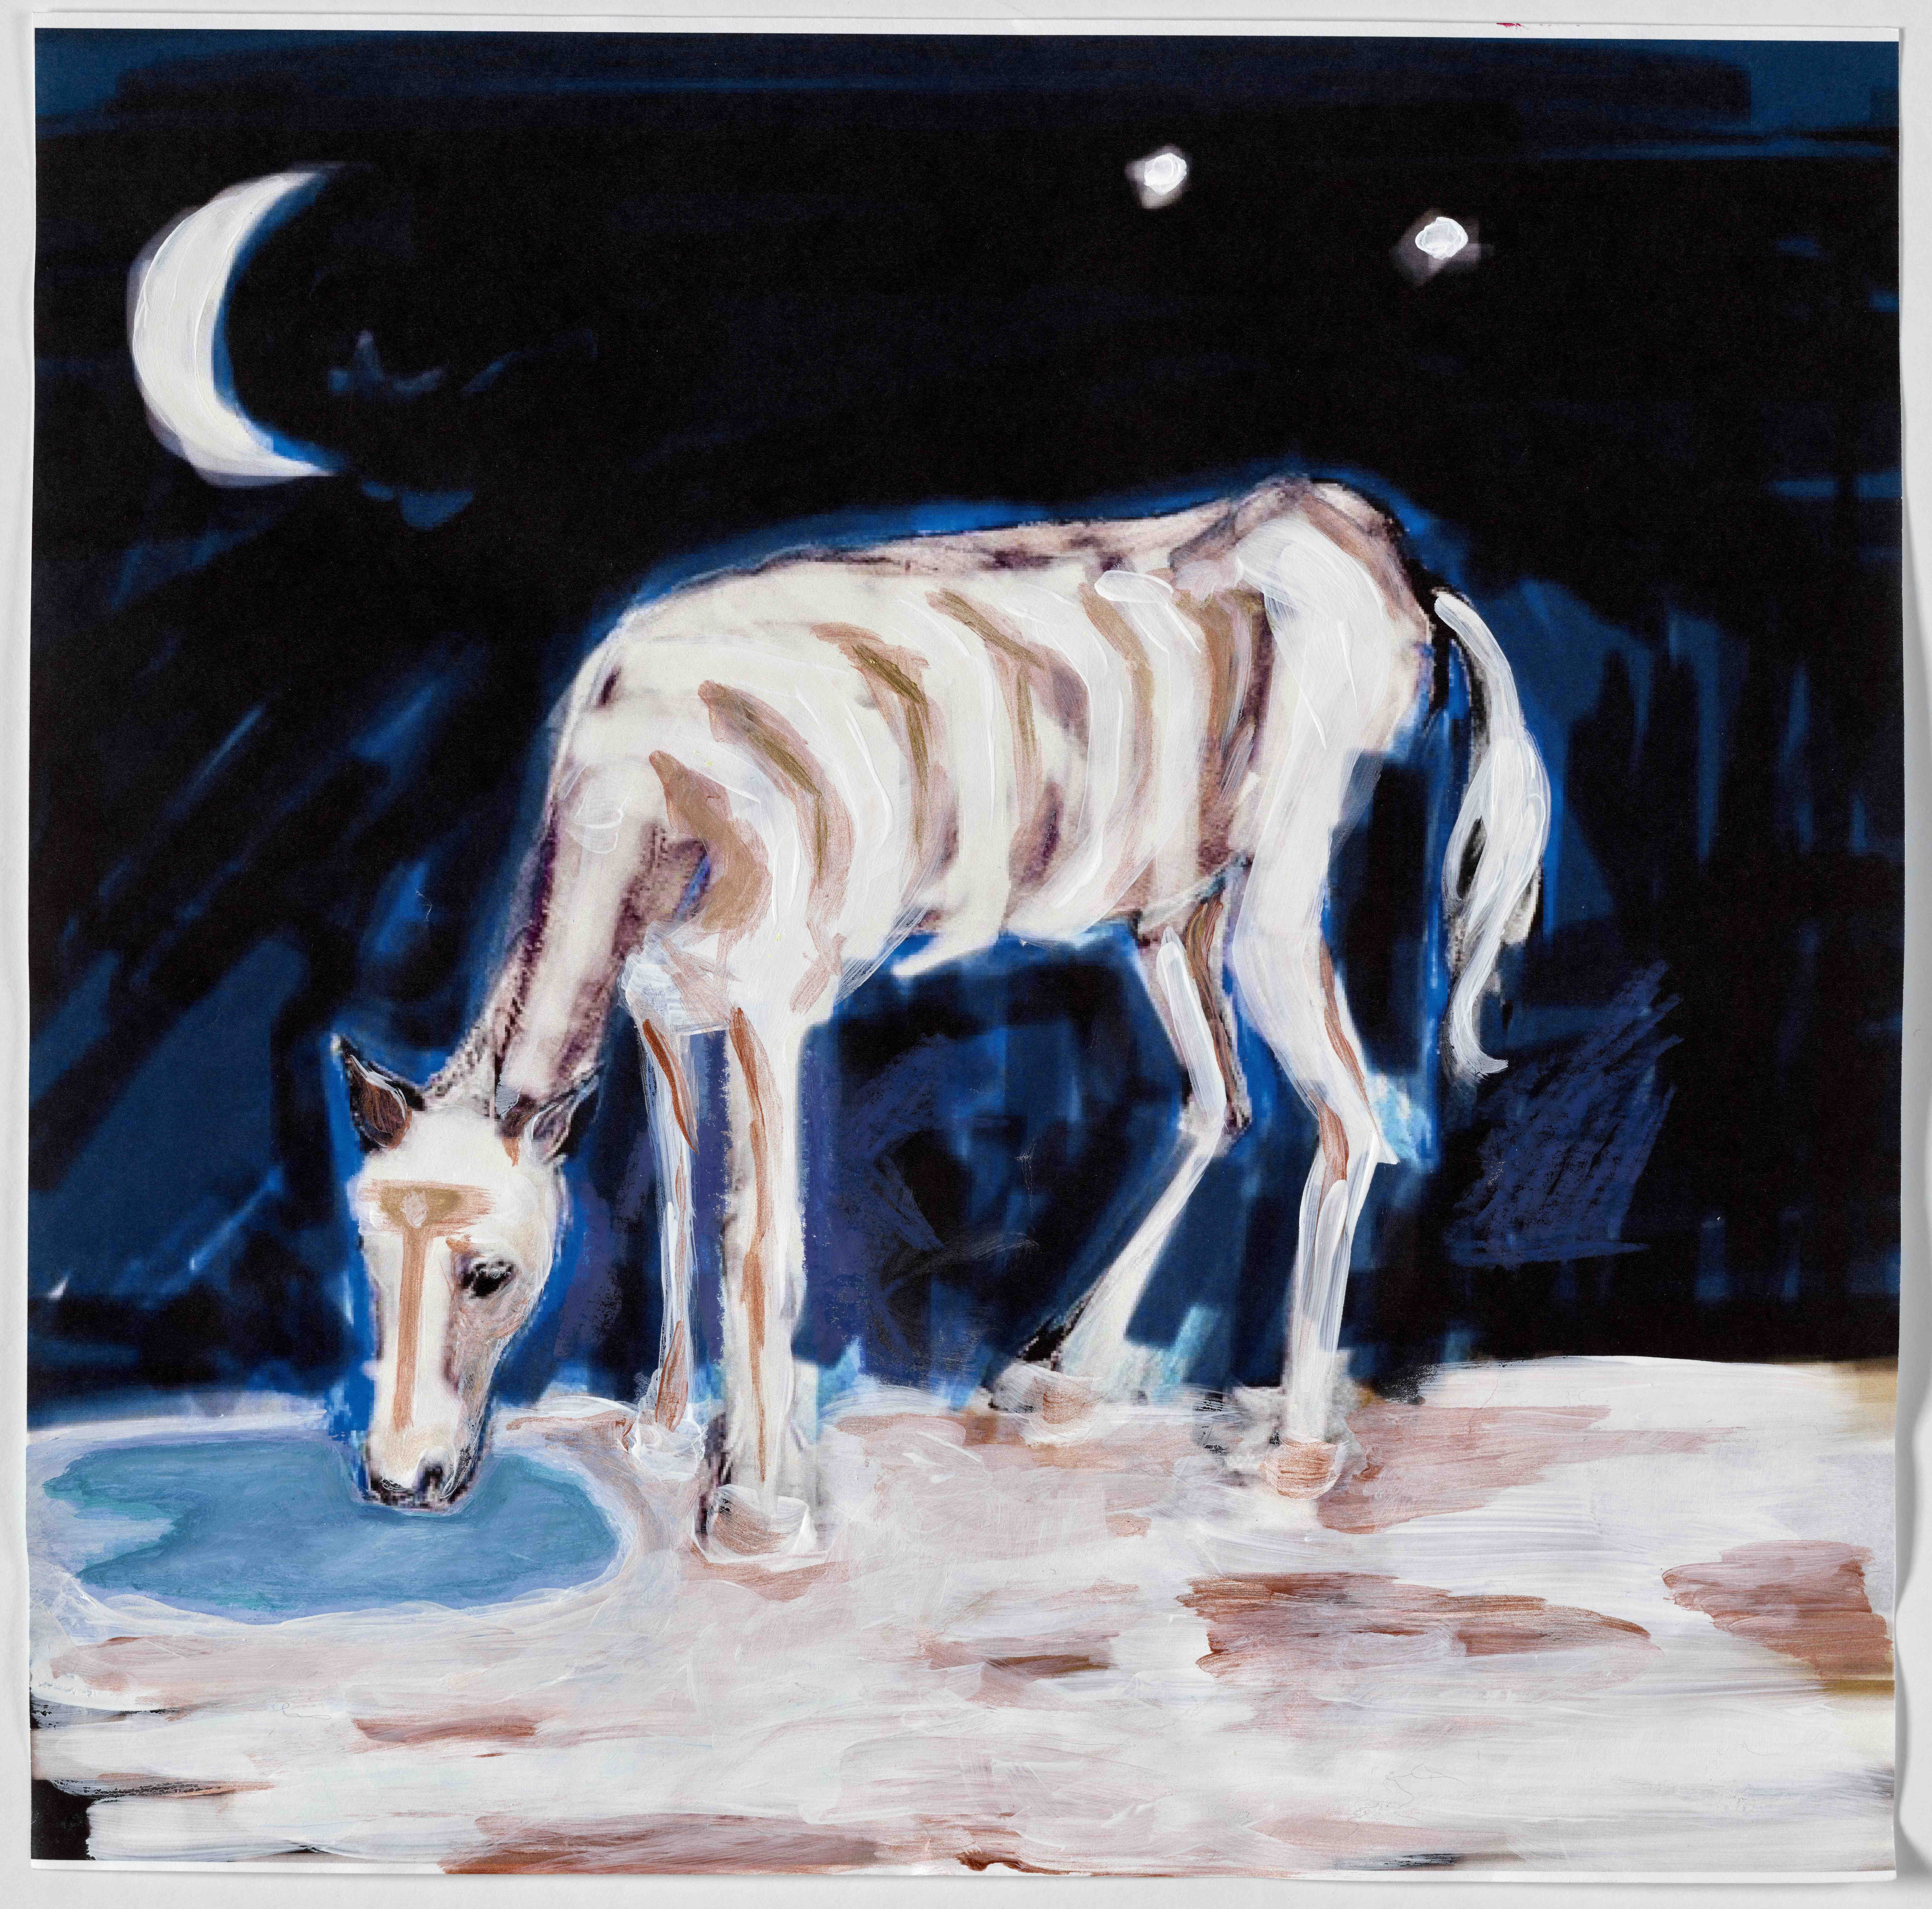 An illustration showing a horse drinking at a pool of water against a dark night sky with a crescent moon above.